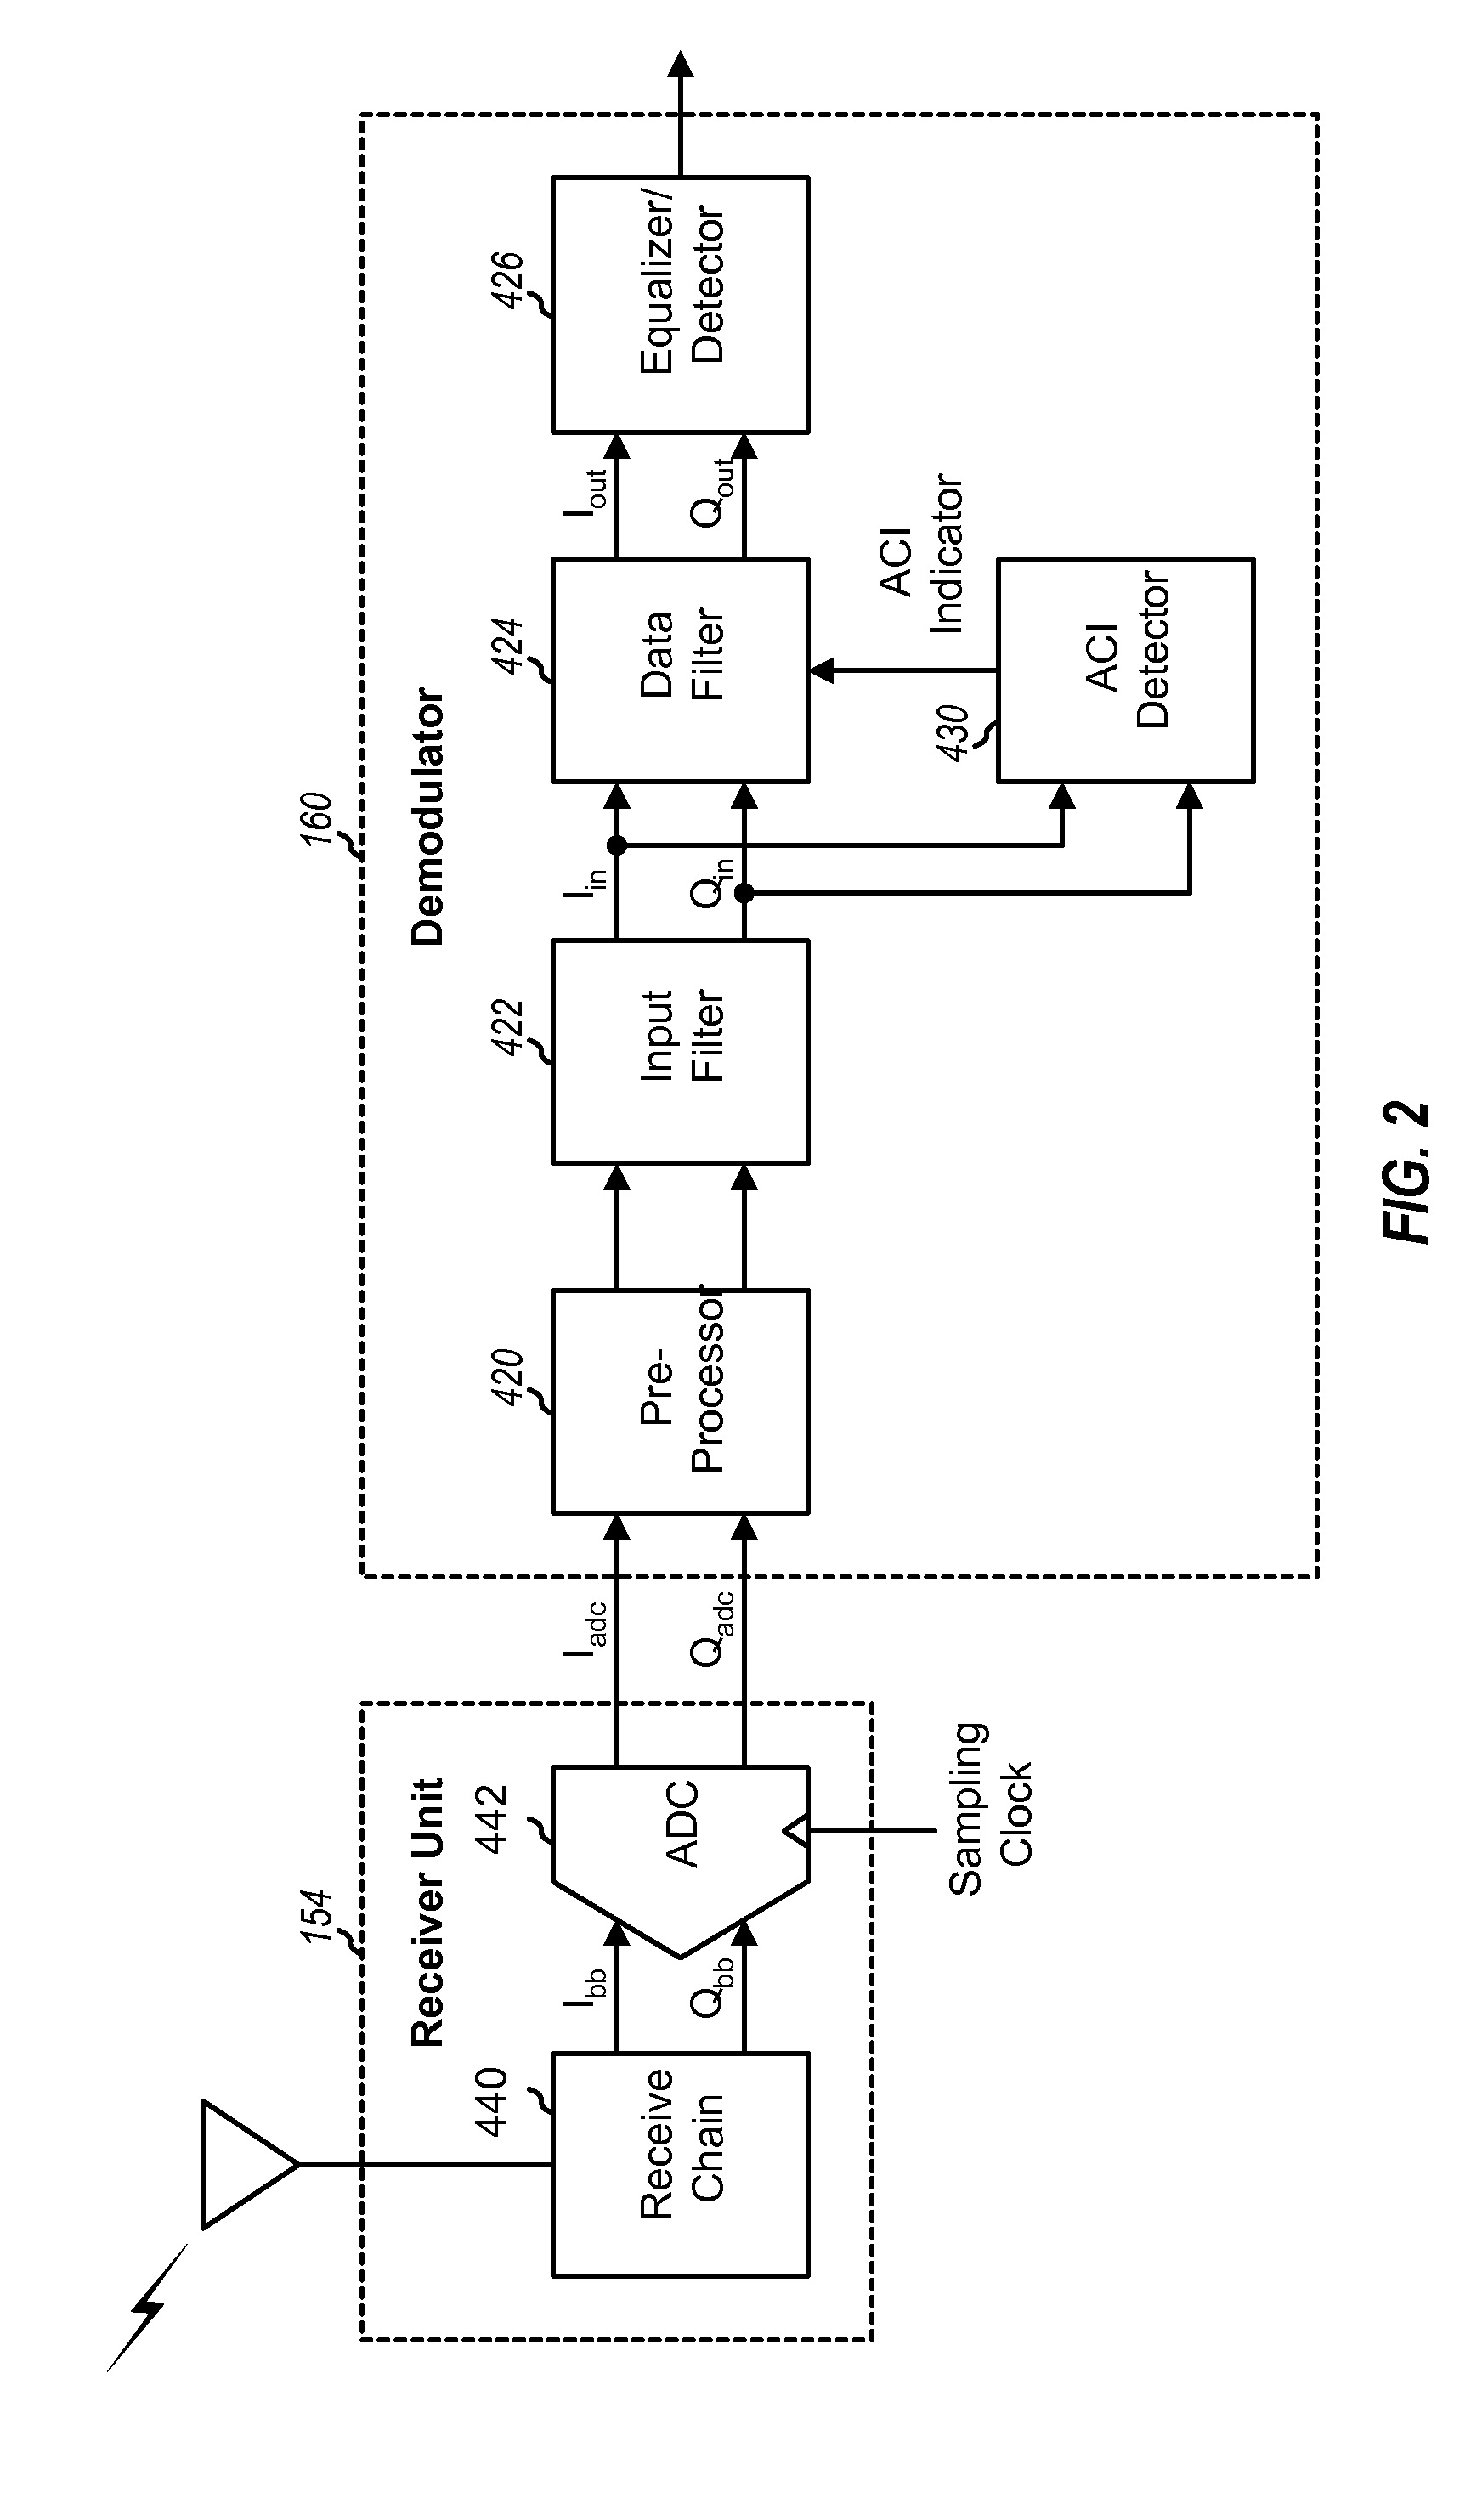 Power control method for a geran system to increase geran network capacity